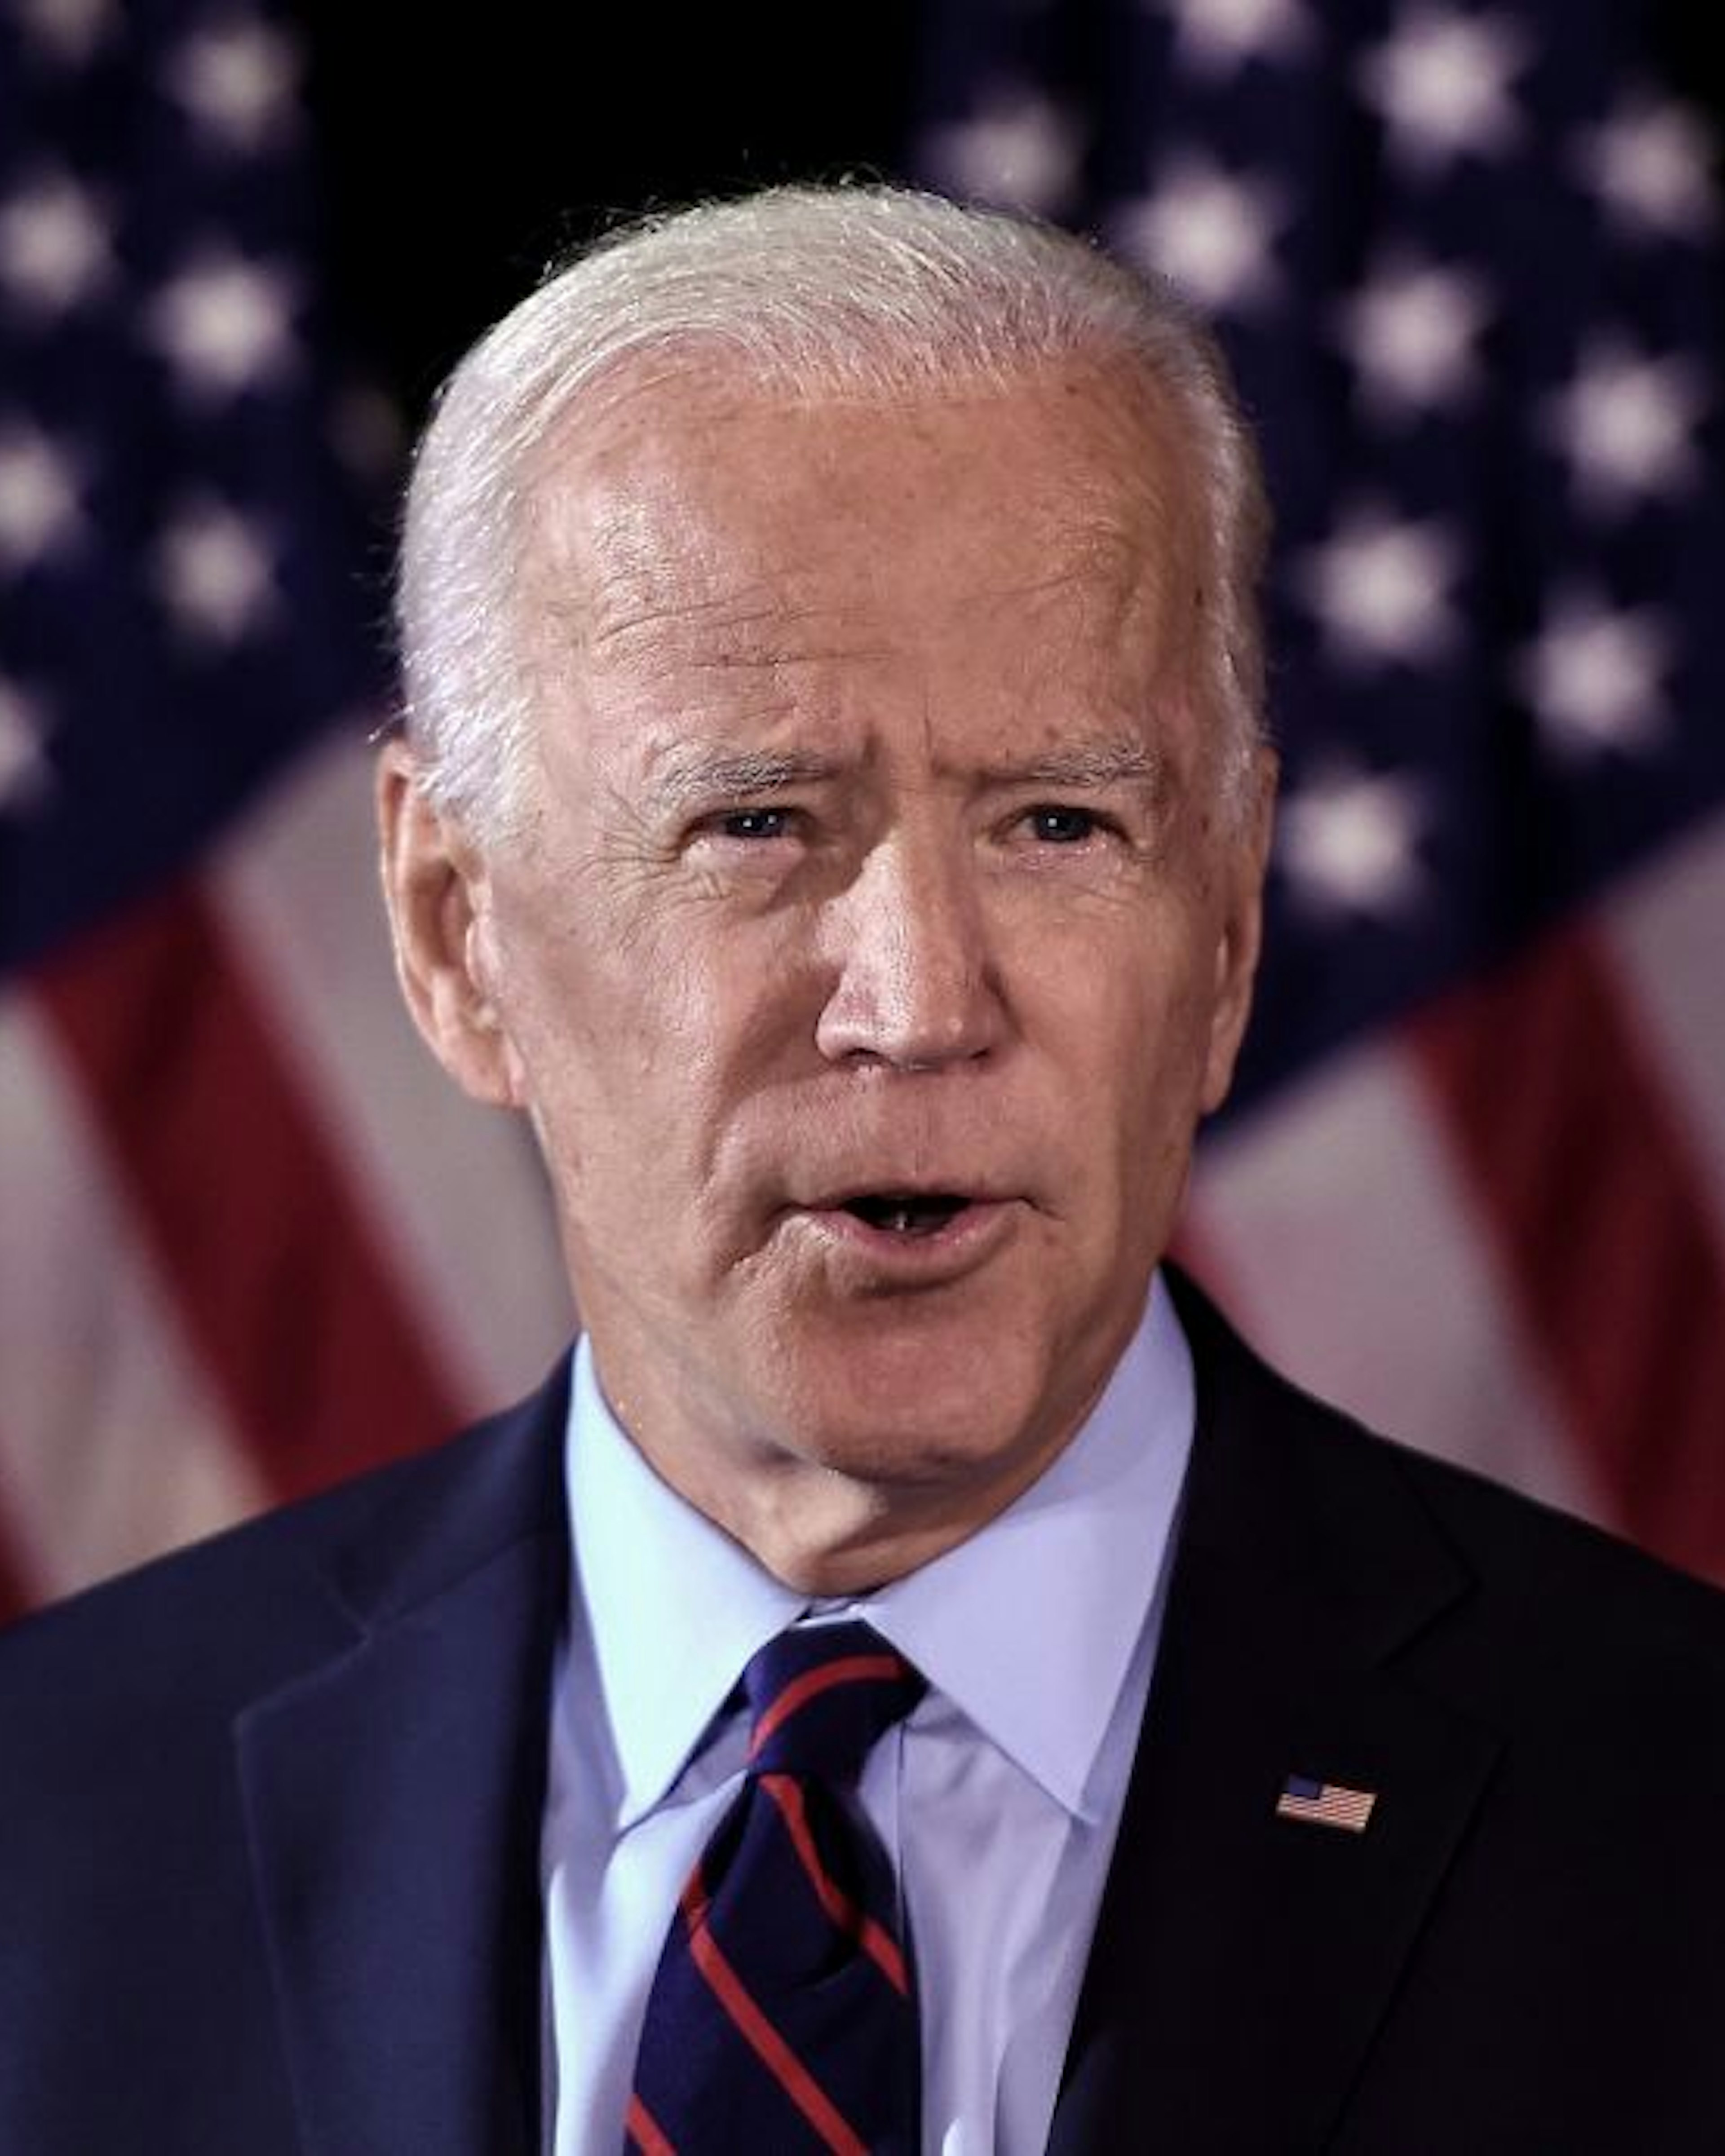 Democratic presidential hopeful Joe Biden makes a statement on Ukraine during a press conference at the Hotel Du Pont on September 24, 2019, in Wilmington, Delaware. (Photo by Olivier Douliery / AFP) (Photo by OLIVIER DOULIERY/AFP via Getty Images)